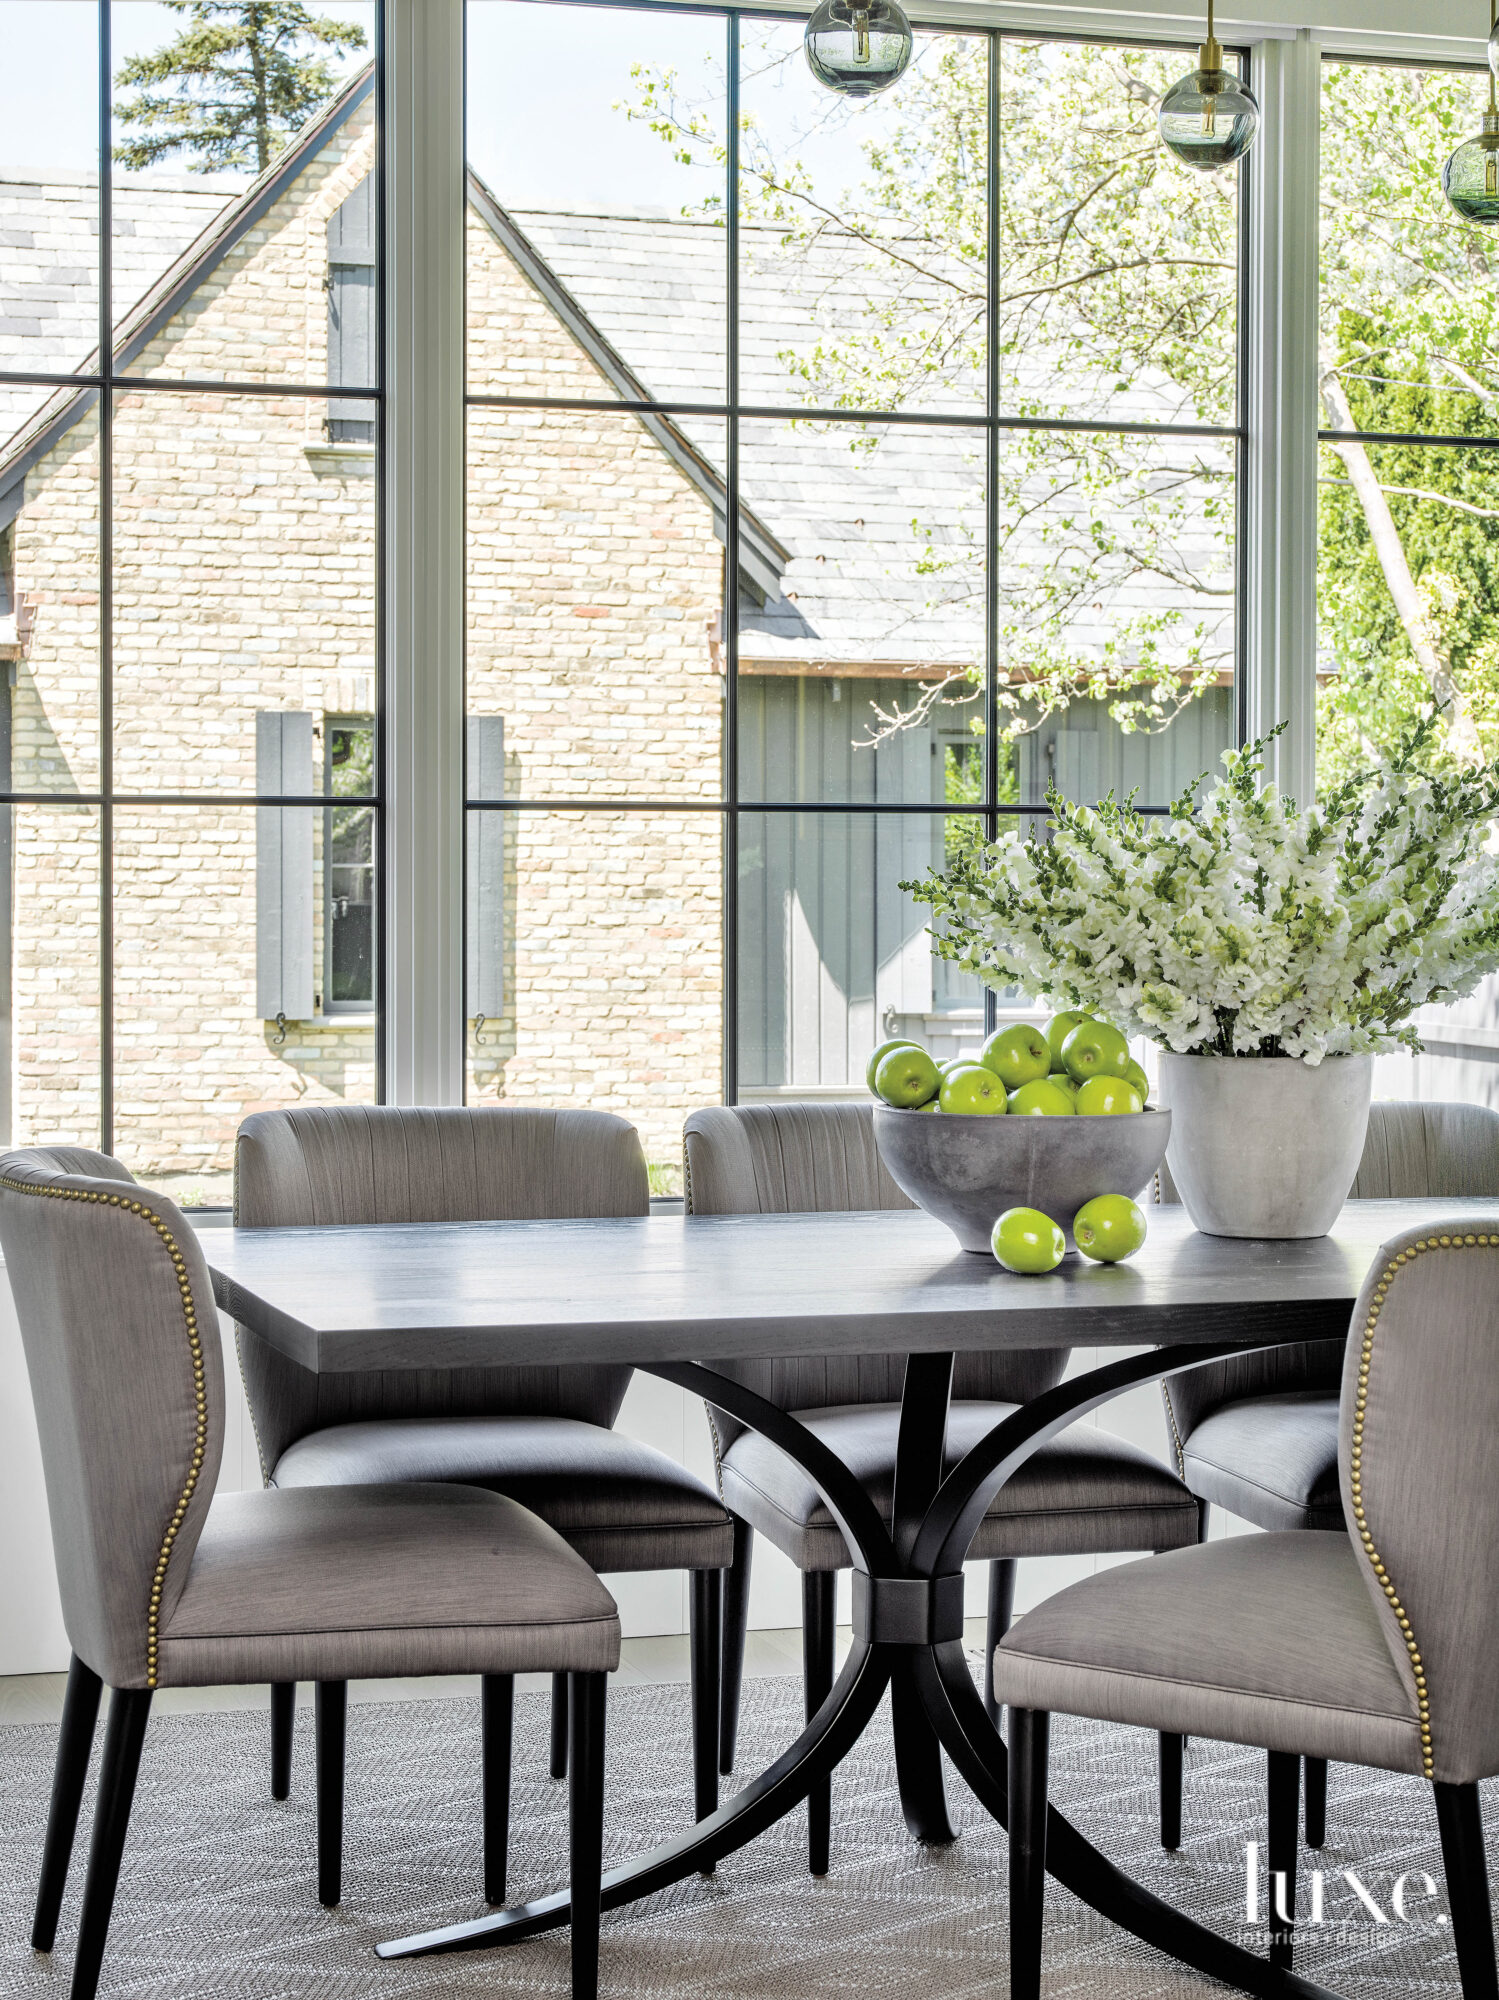 The breakfast room which looks out through floor-to-ceiling windows, is furnished with a gray dining table and gray upholstered chairs.